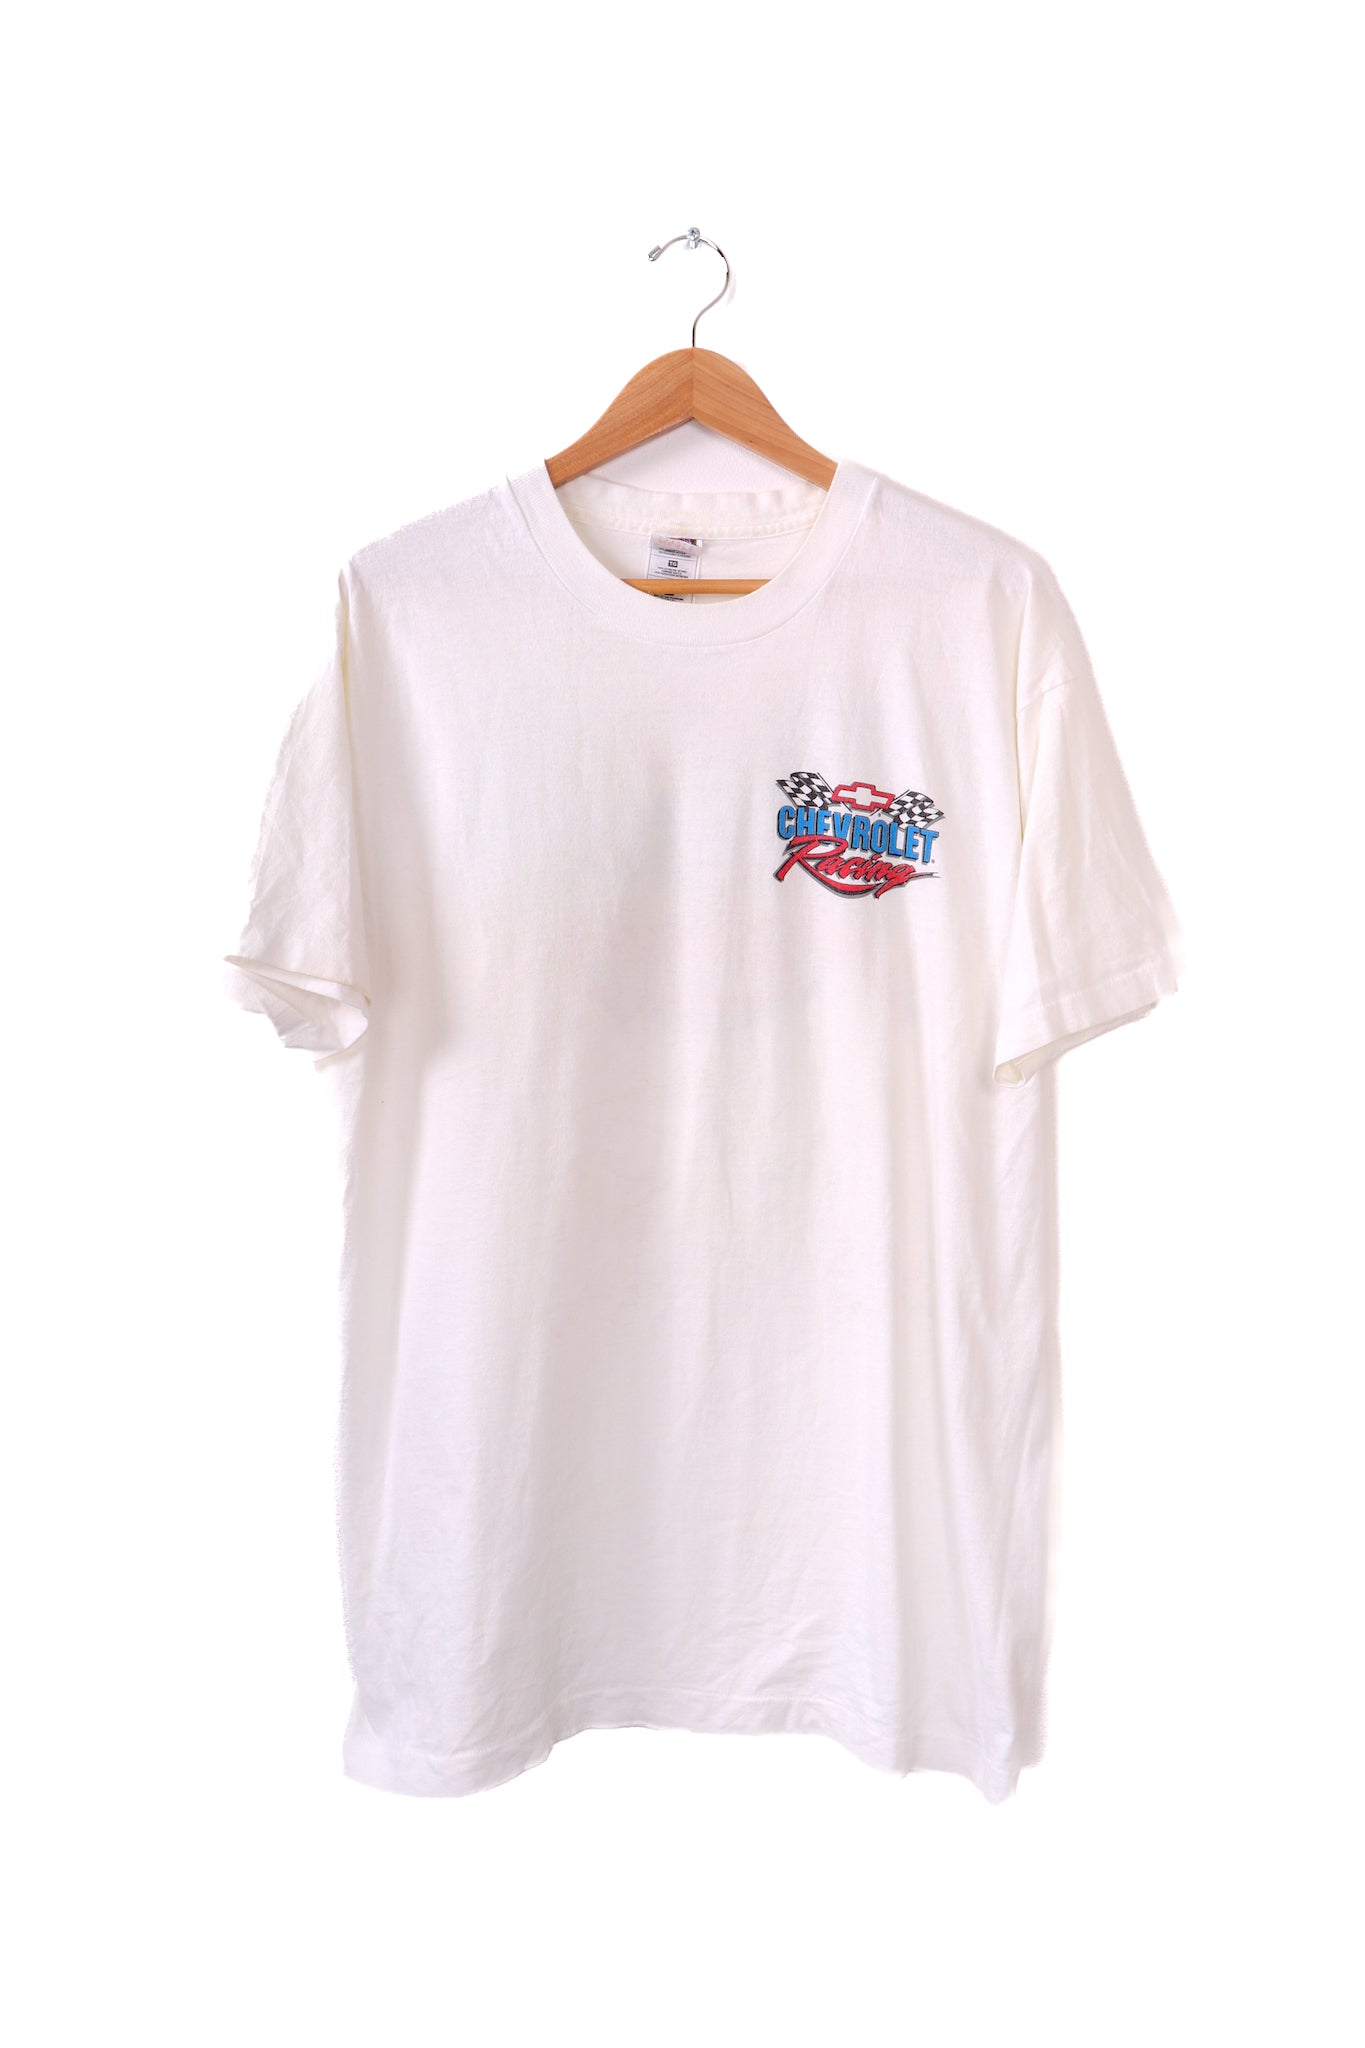 Vintage Early 90s Chevrolet Racing T-Shirt